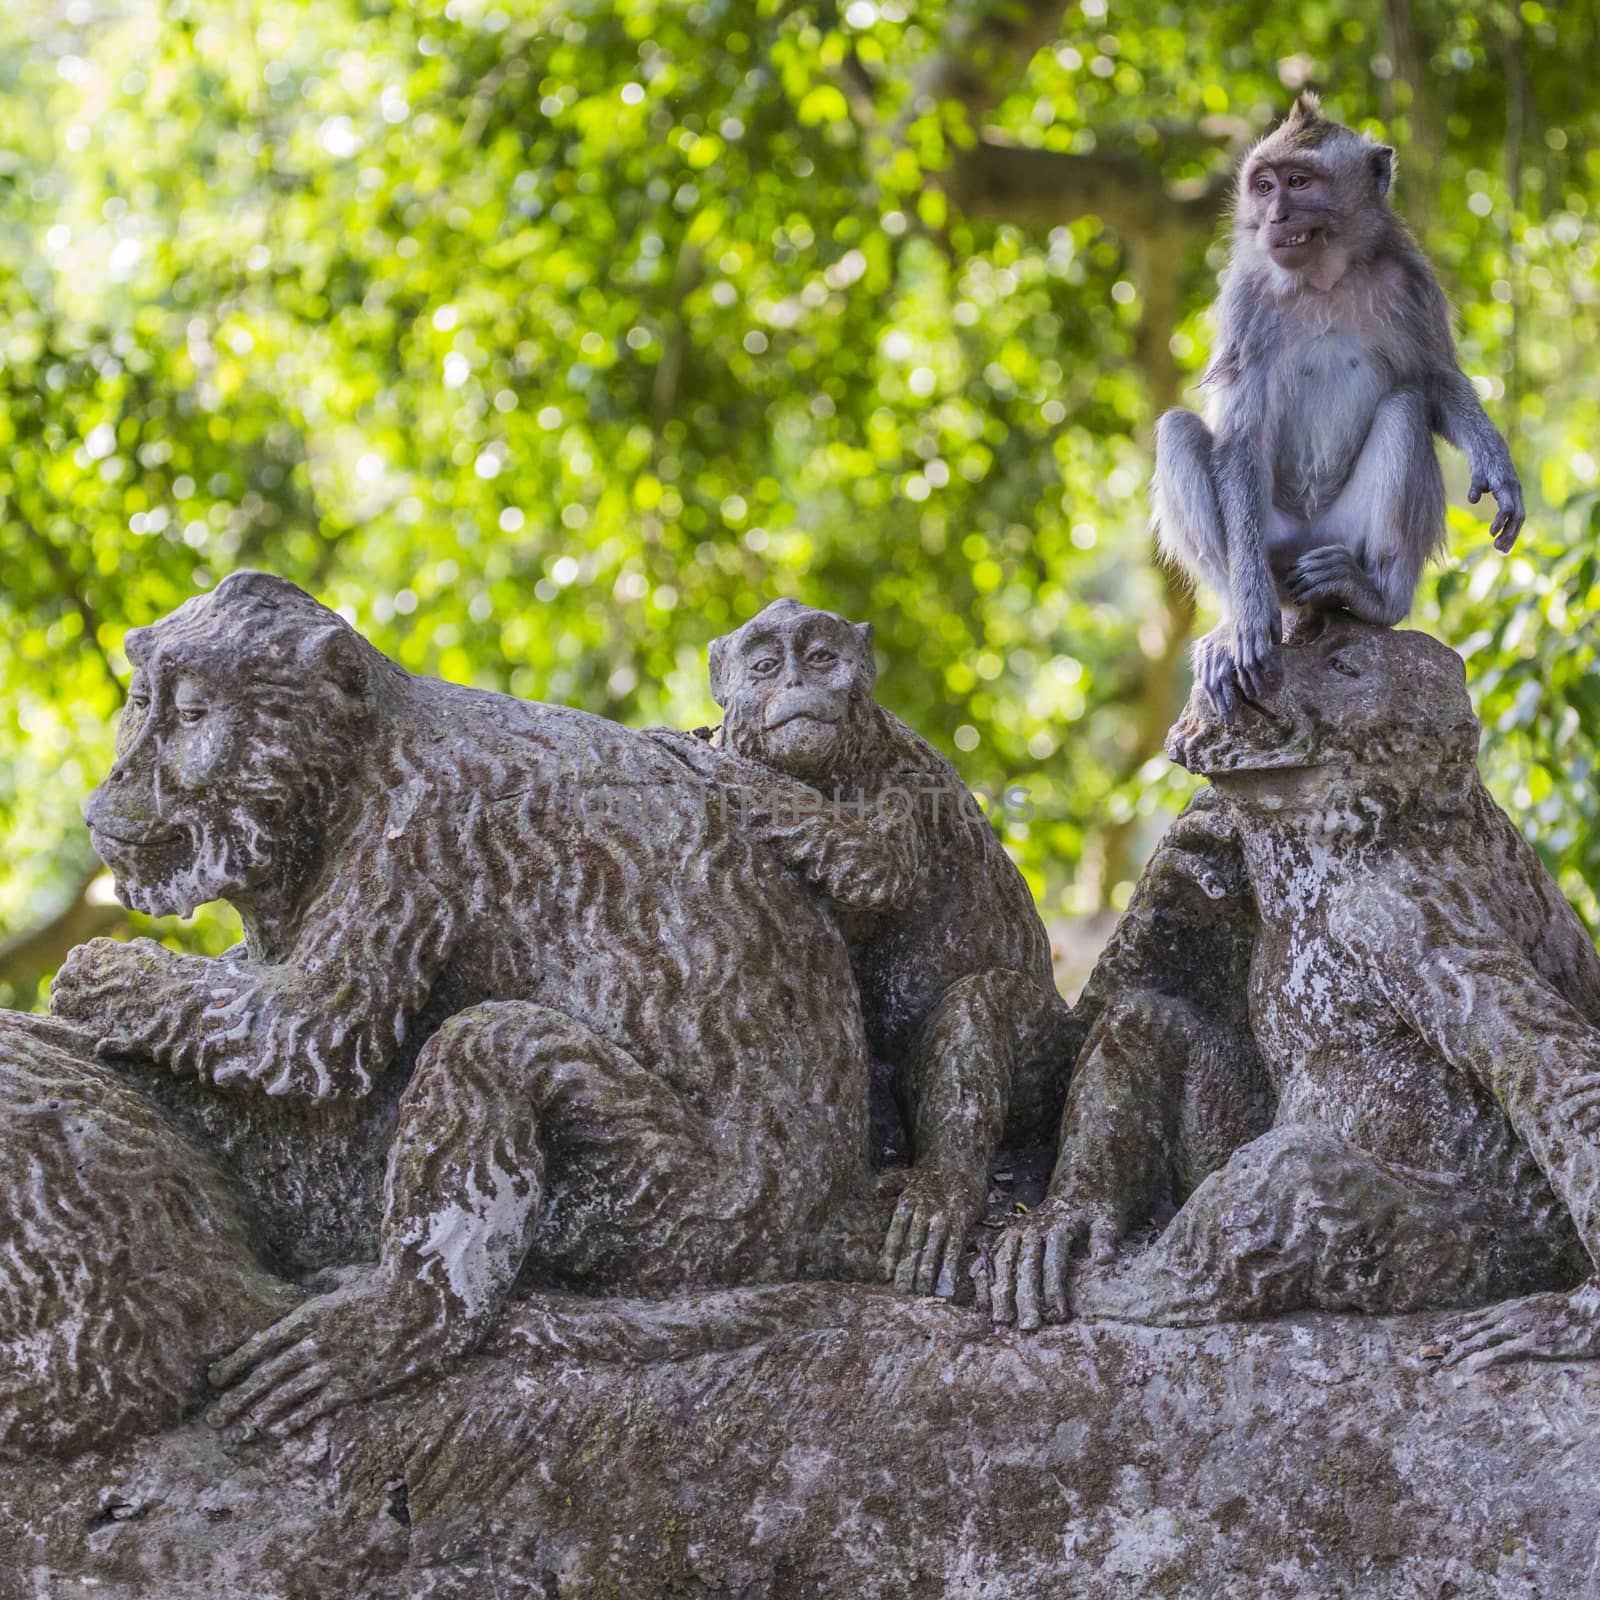 Long-tailed macaques (Macaca fascicularis) in Sacred Monkey Fore by mariusz_prusaczyk